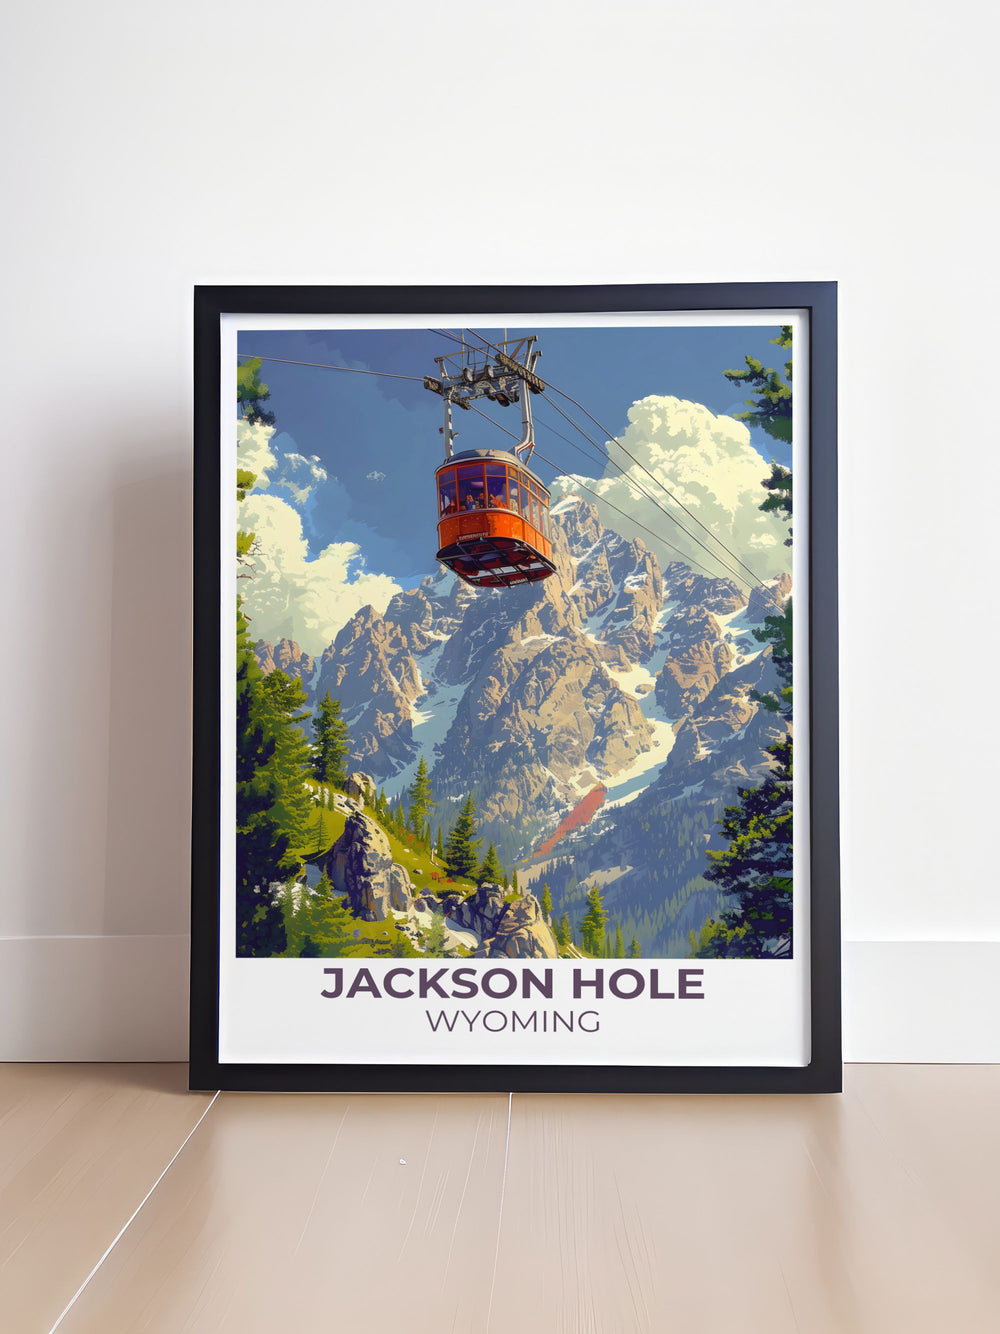 Art print featuring the tram tower in Jackson Hole with mountainous background ideal for ski enthusiasts and mountaineers